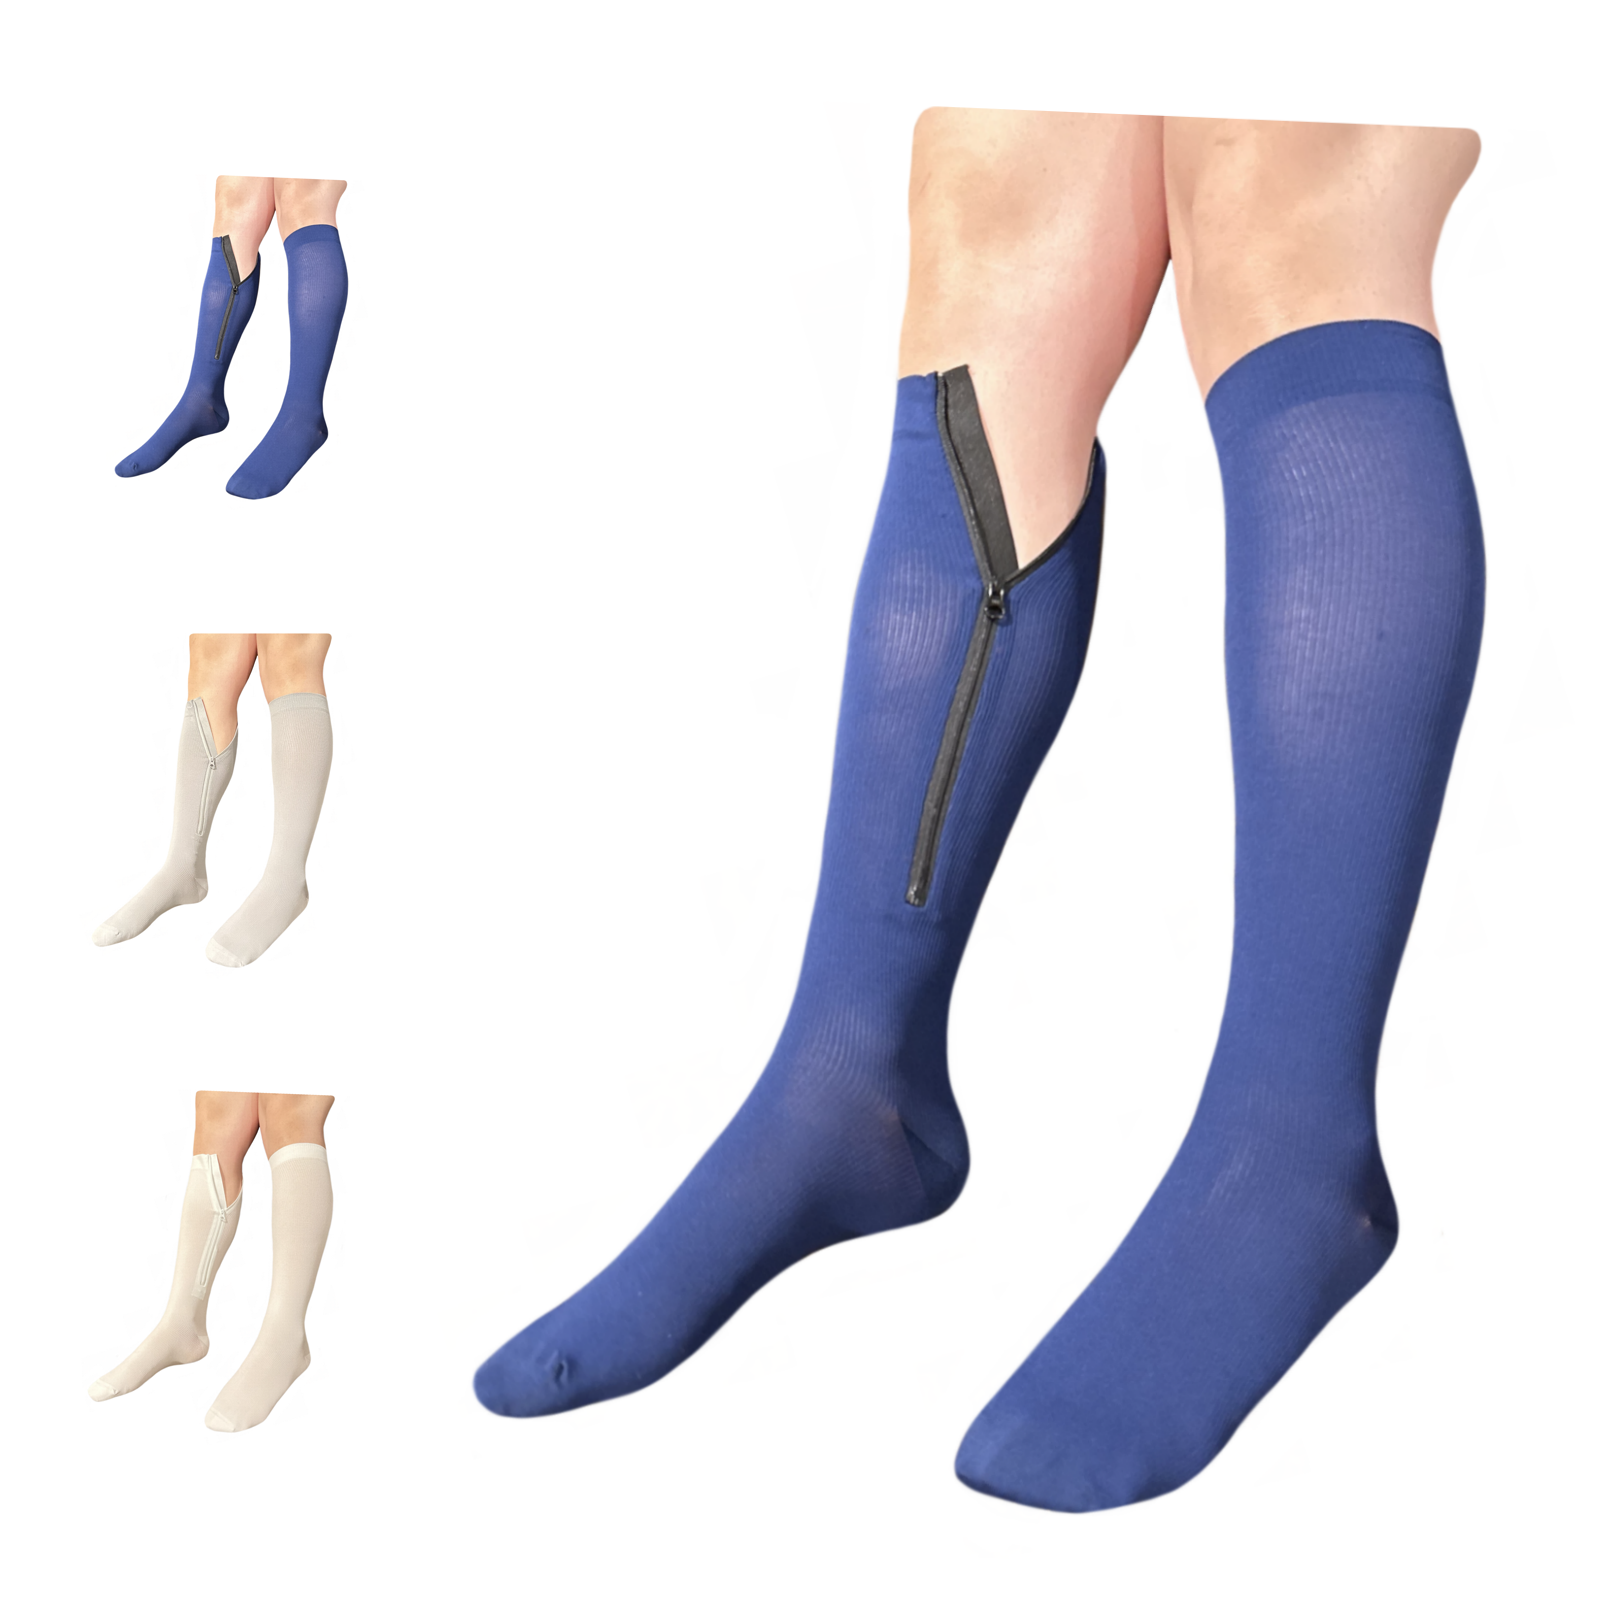 EWRGGR 2 Pair Zip Compression Socks for Women Closed Toe Zipper Socks abckd  Wide Calf Easy on off 15-20 mmHg : : Health & Personal Care